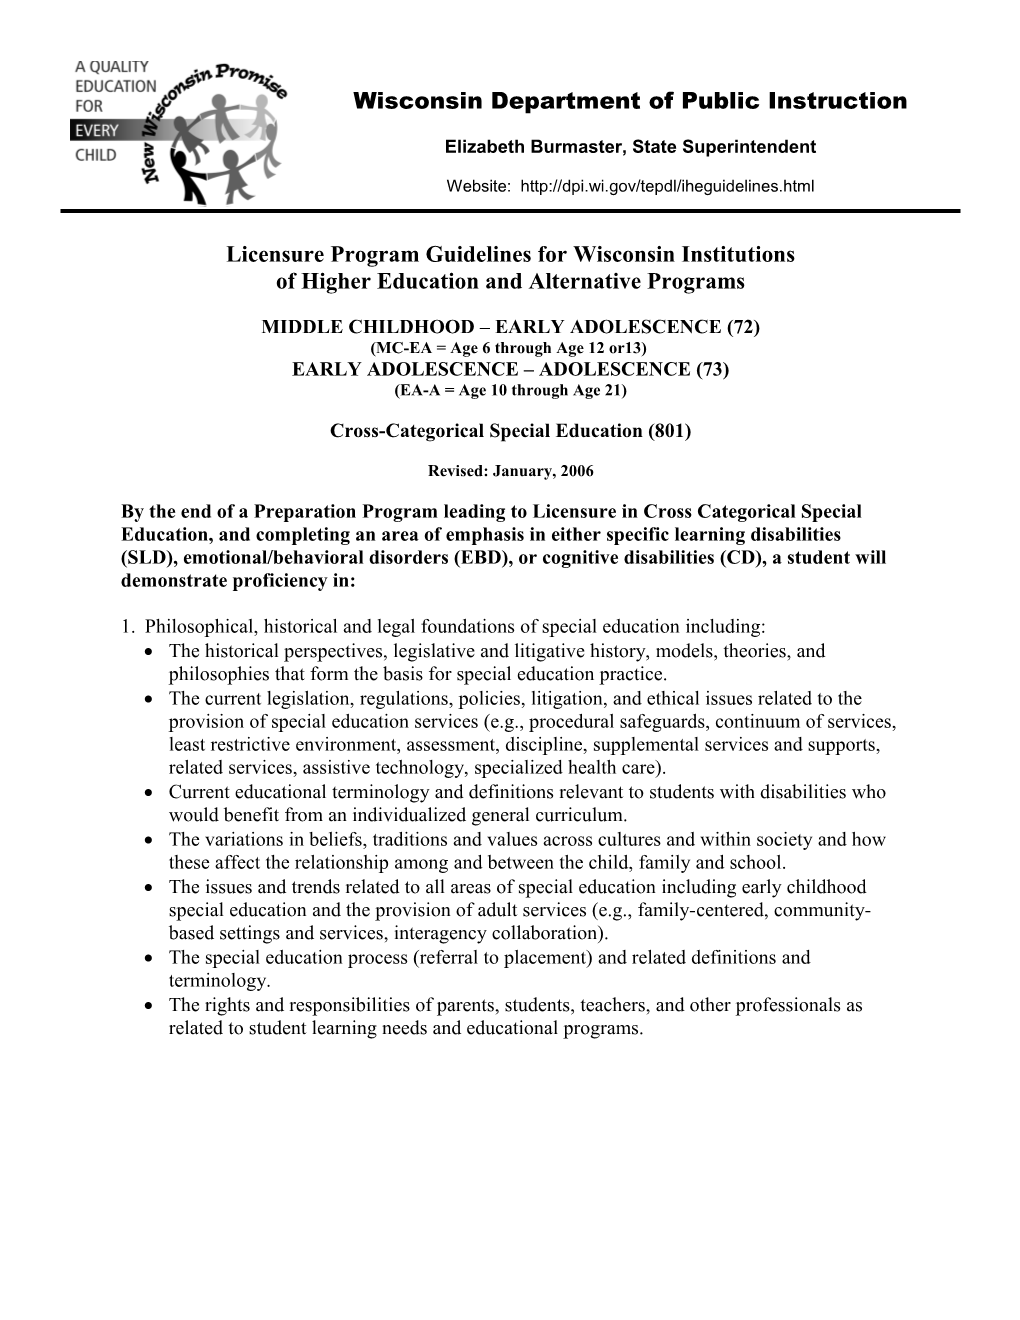 Licensure Program Guidelines for Wisconsin Institutions of Higher Education and Alternative s1